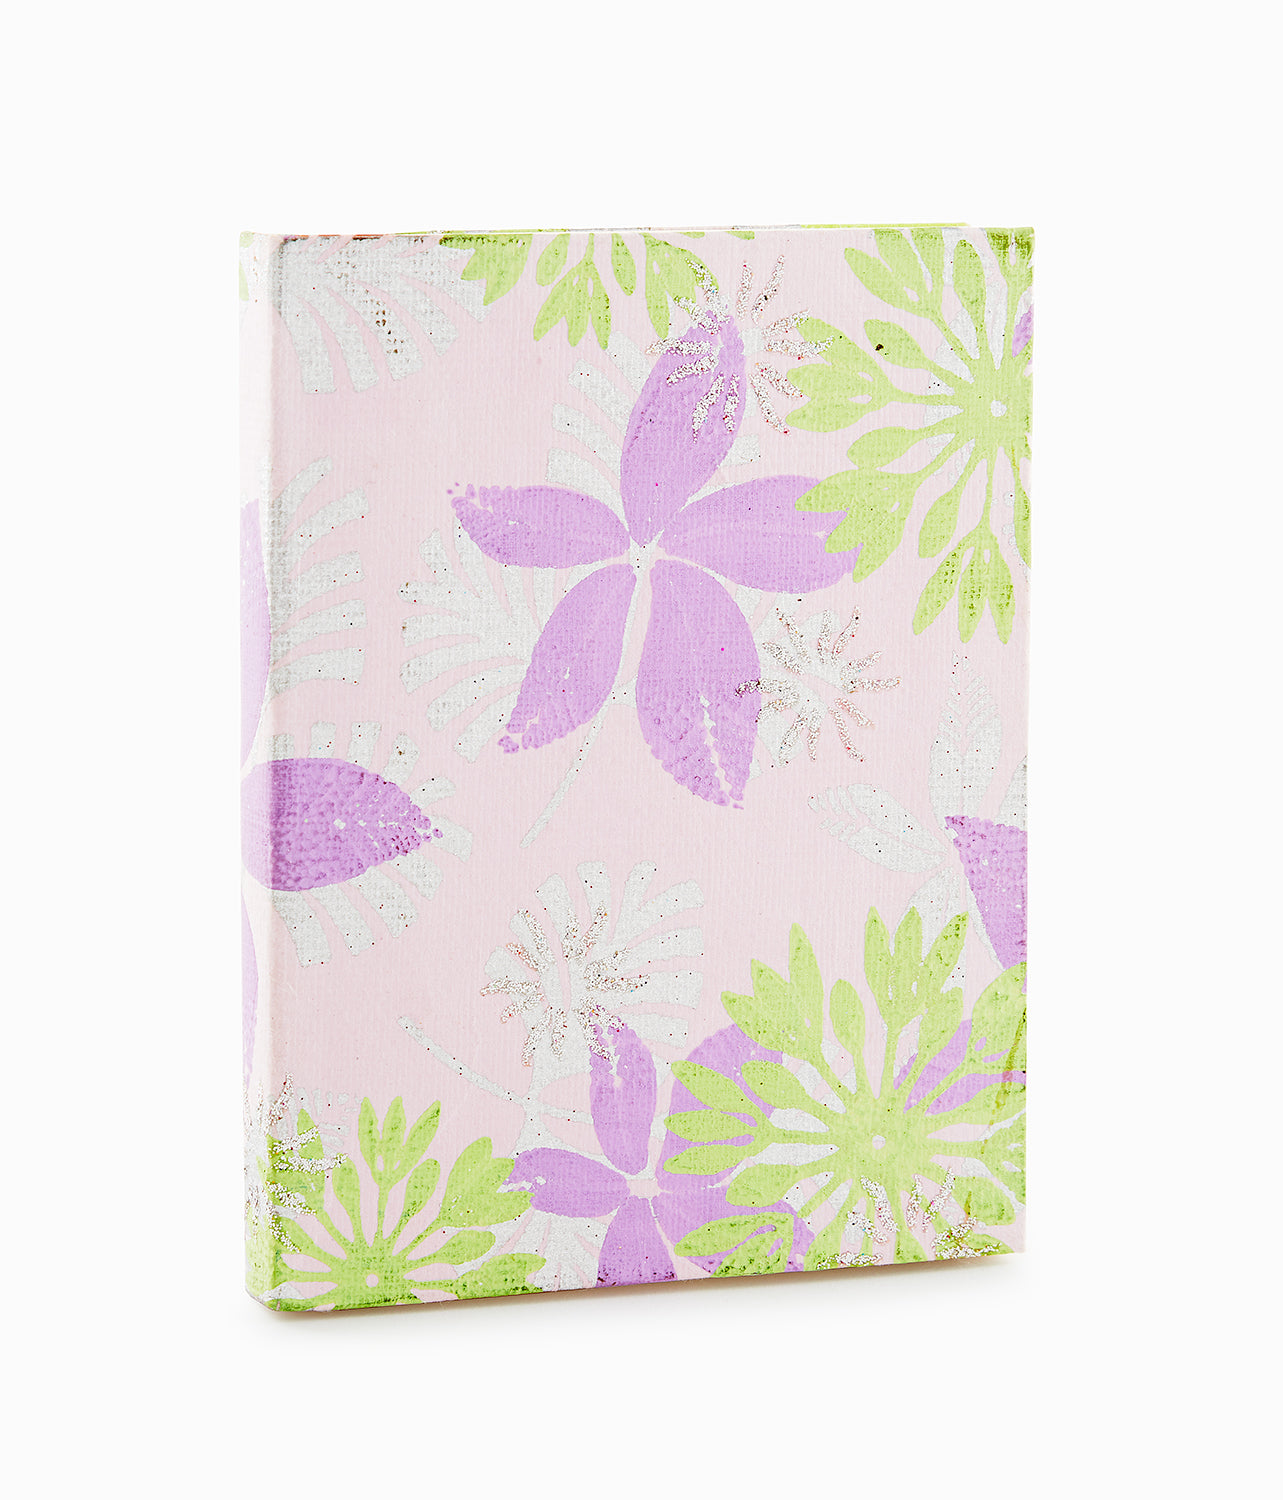 Lavender Purple Colored With Flower Design Diary cloth with Diary-Upcycled Diary!